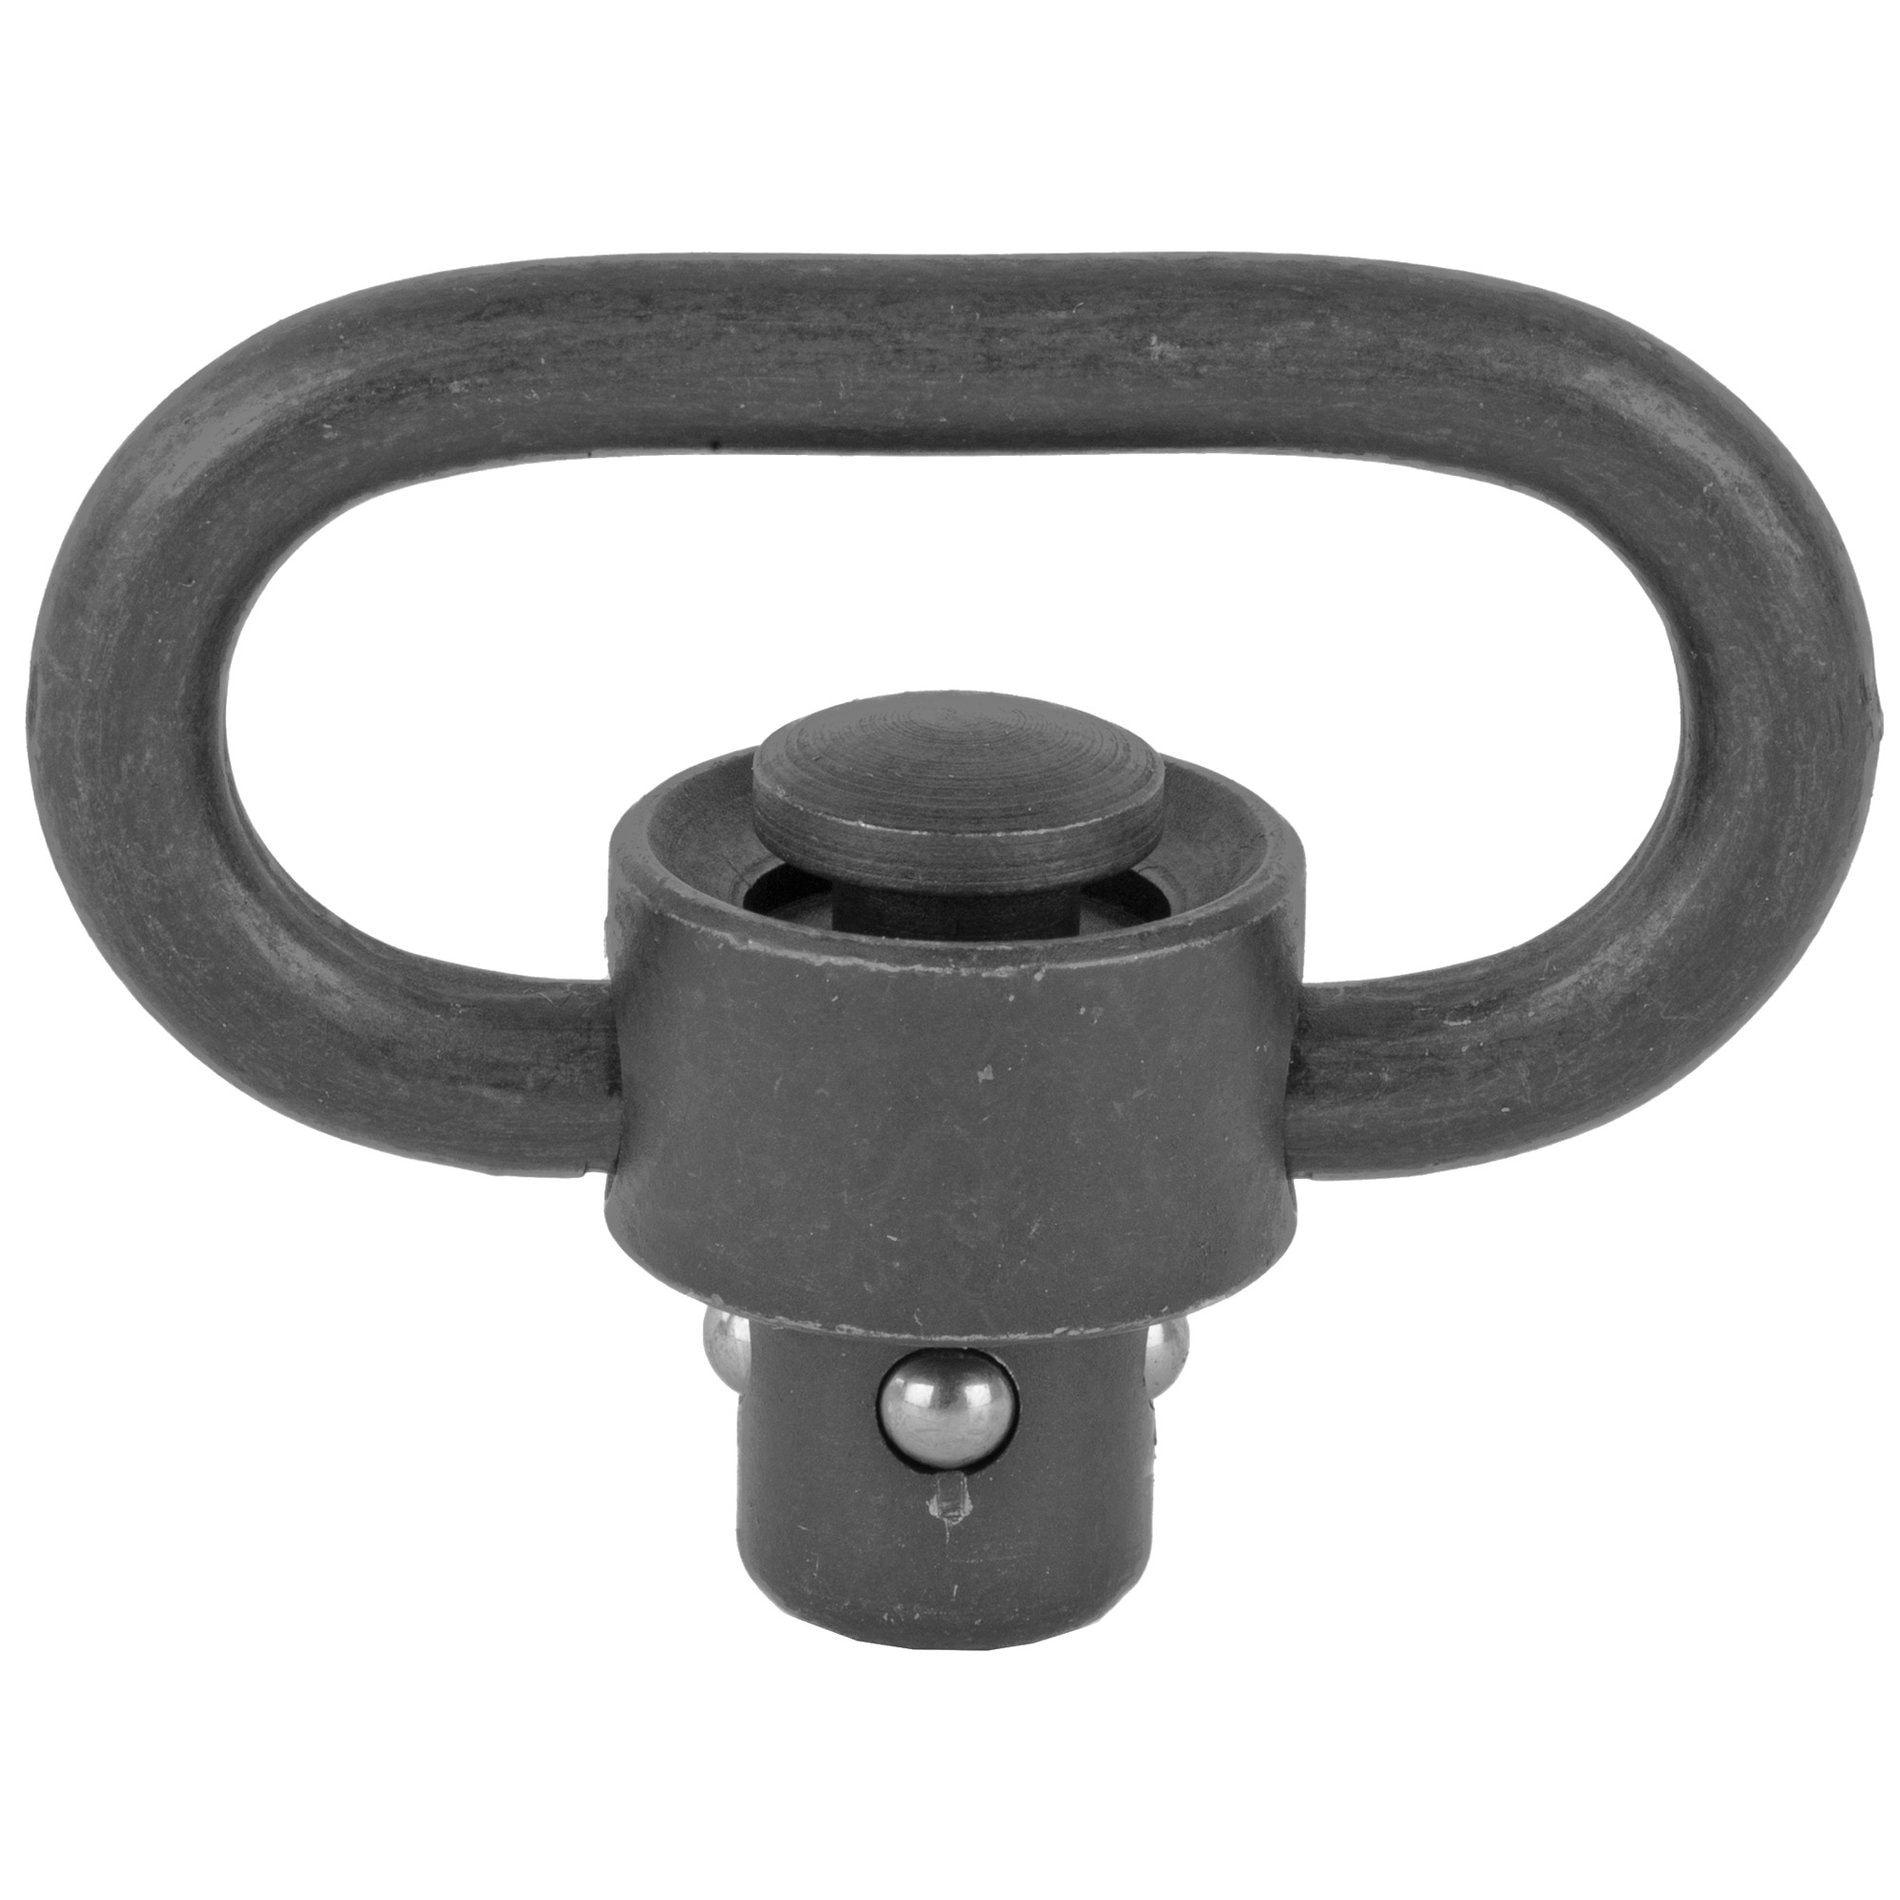 GrovTec Heavy Duty Push Button Sling Swivel for 1.25 Inch Slings - AT3 Tactical